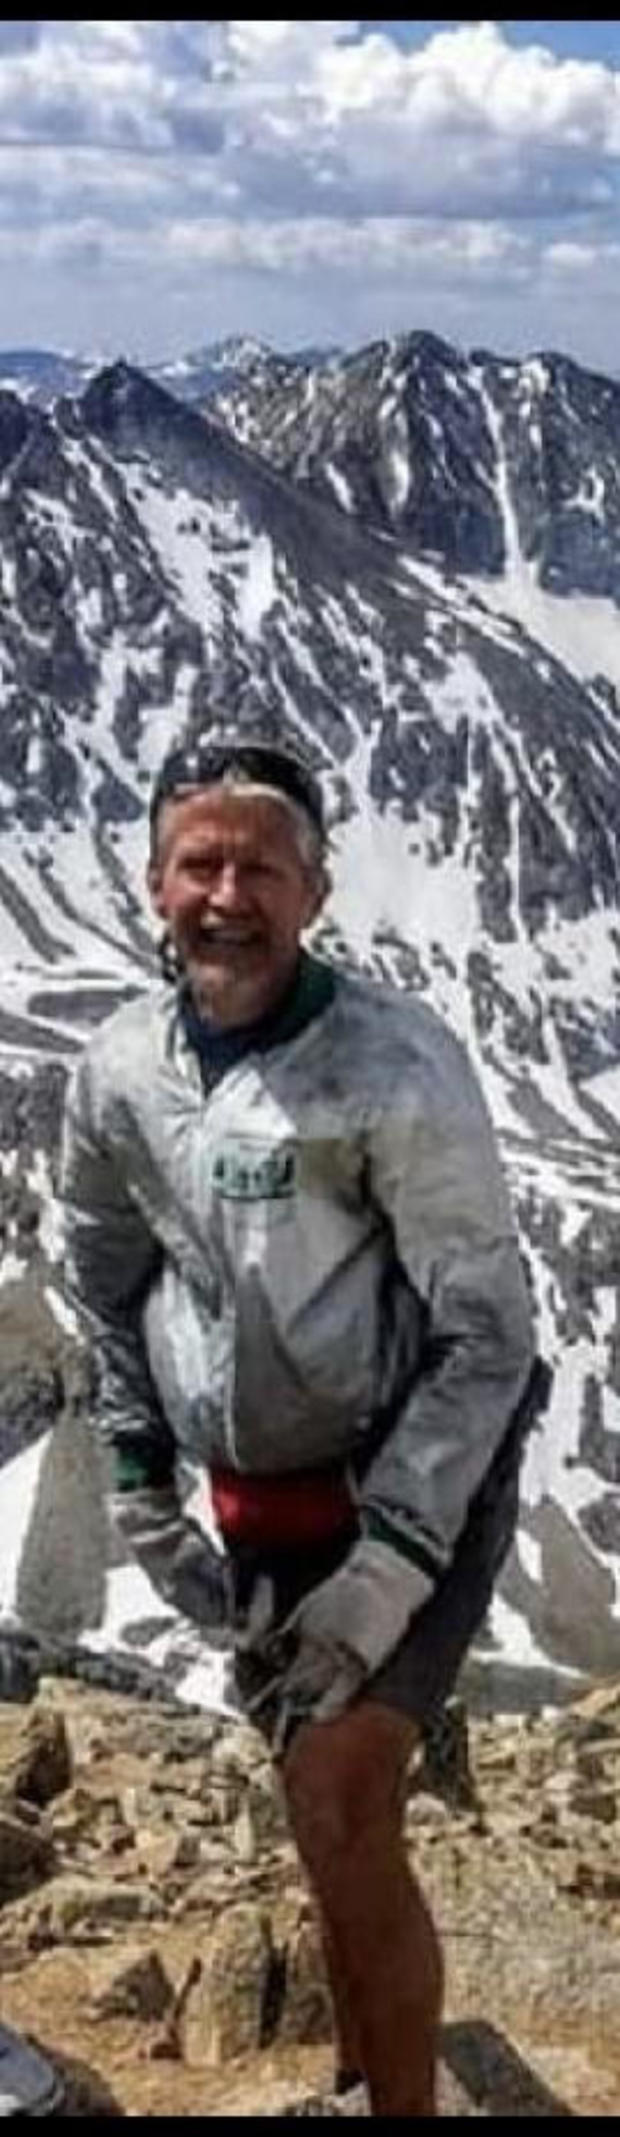 MISSING HIKER - TERRY PANN - CREDIT CHAFFEE COUNTY SEARCH AND RESCUE 